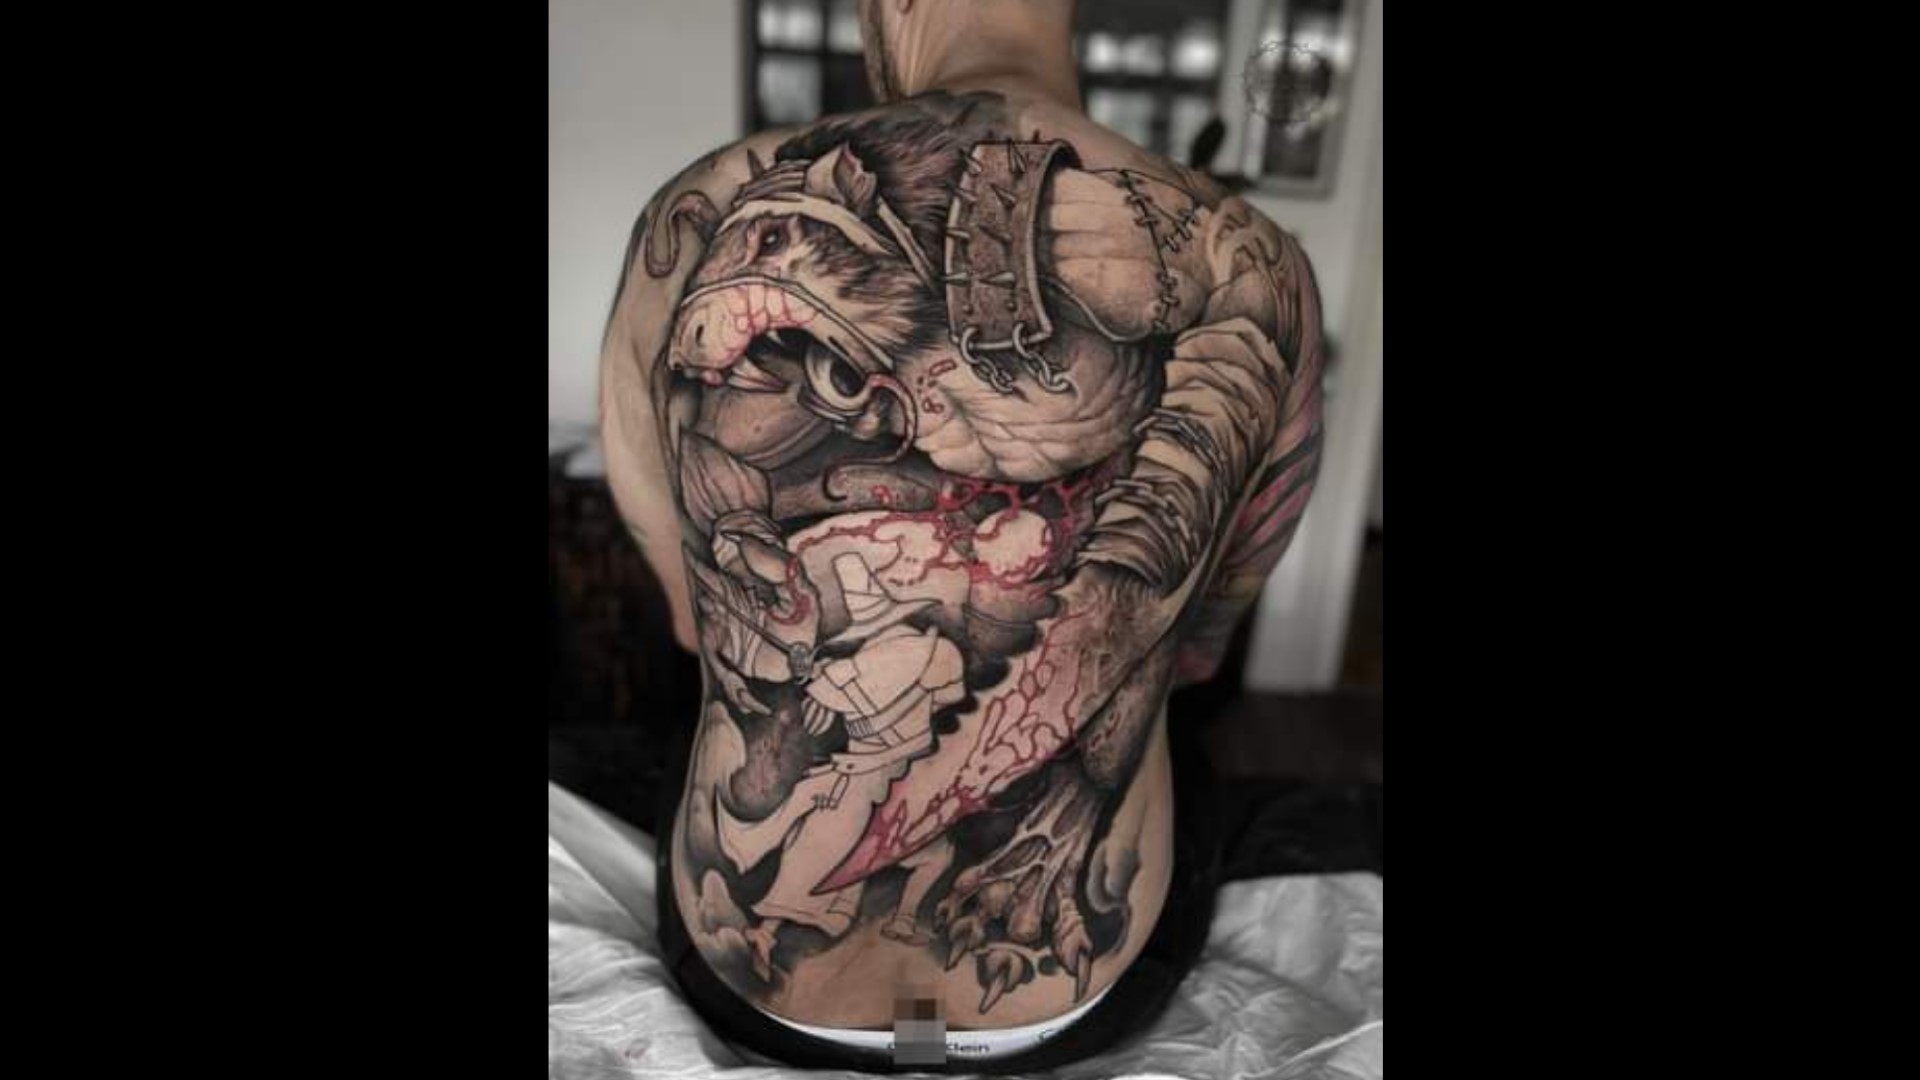 What do you guys think of these tattoo ideas  rWarhammer